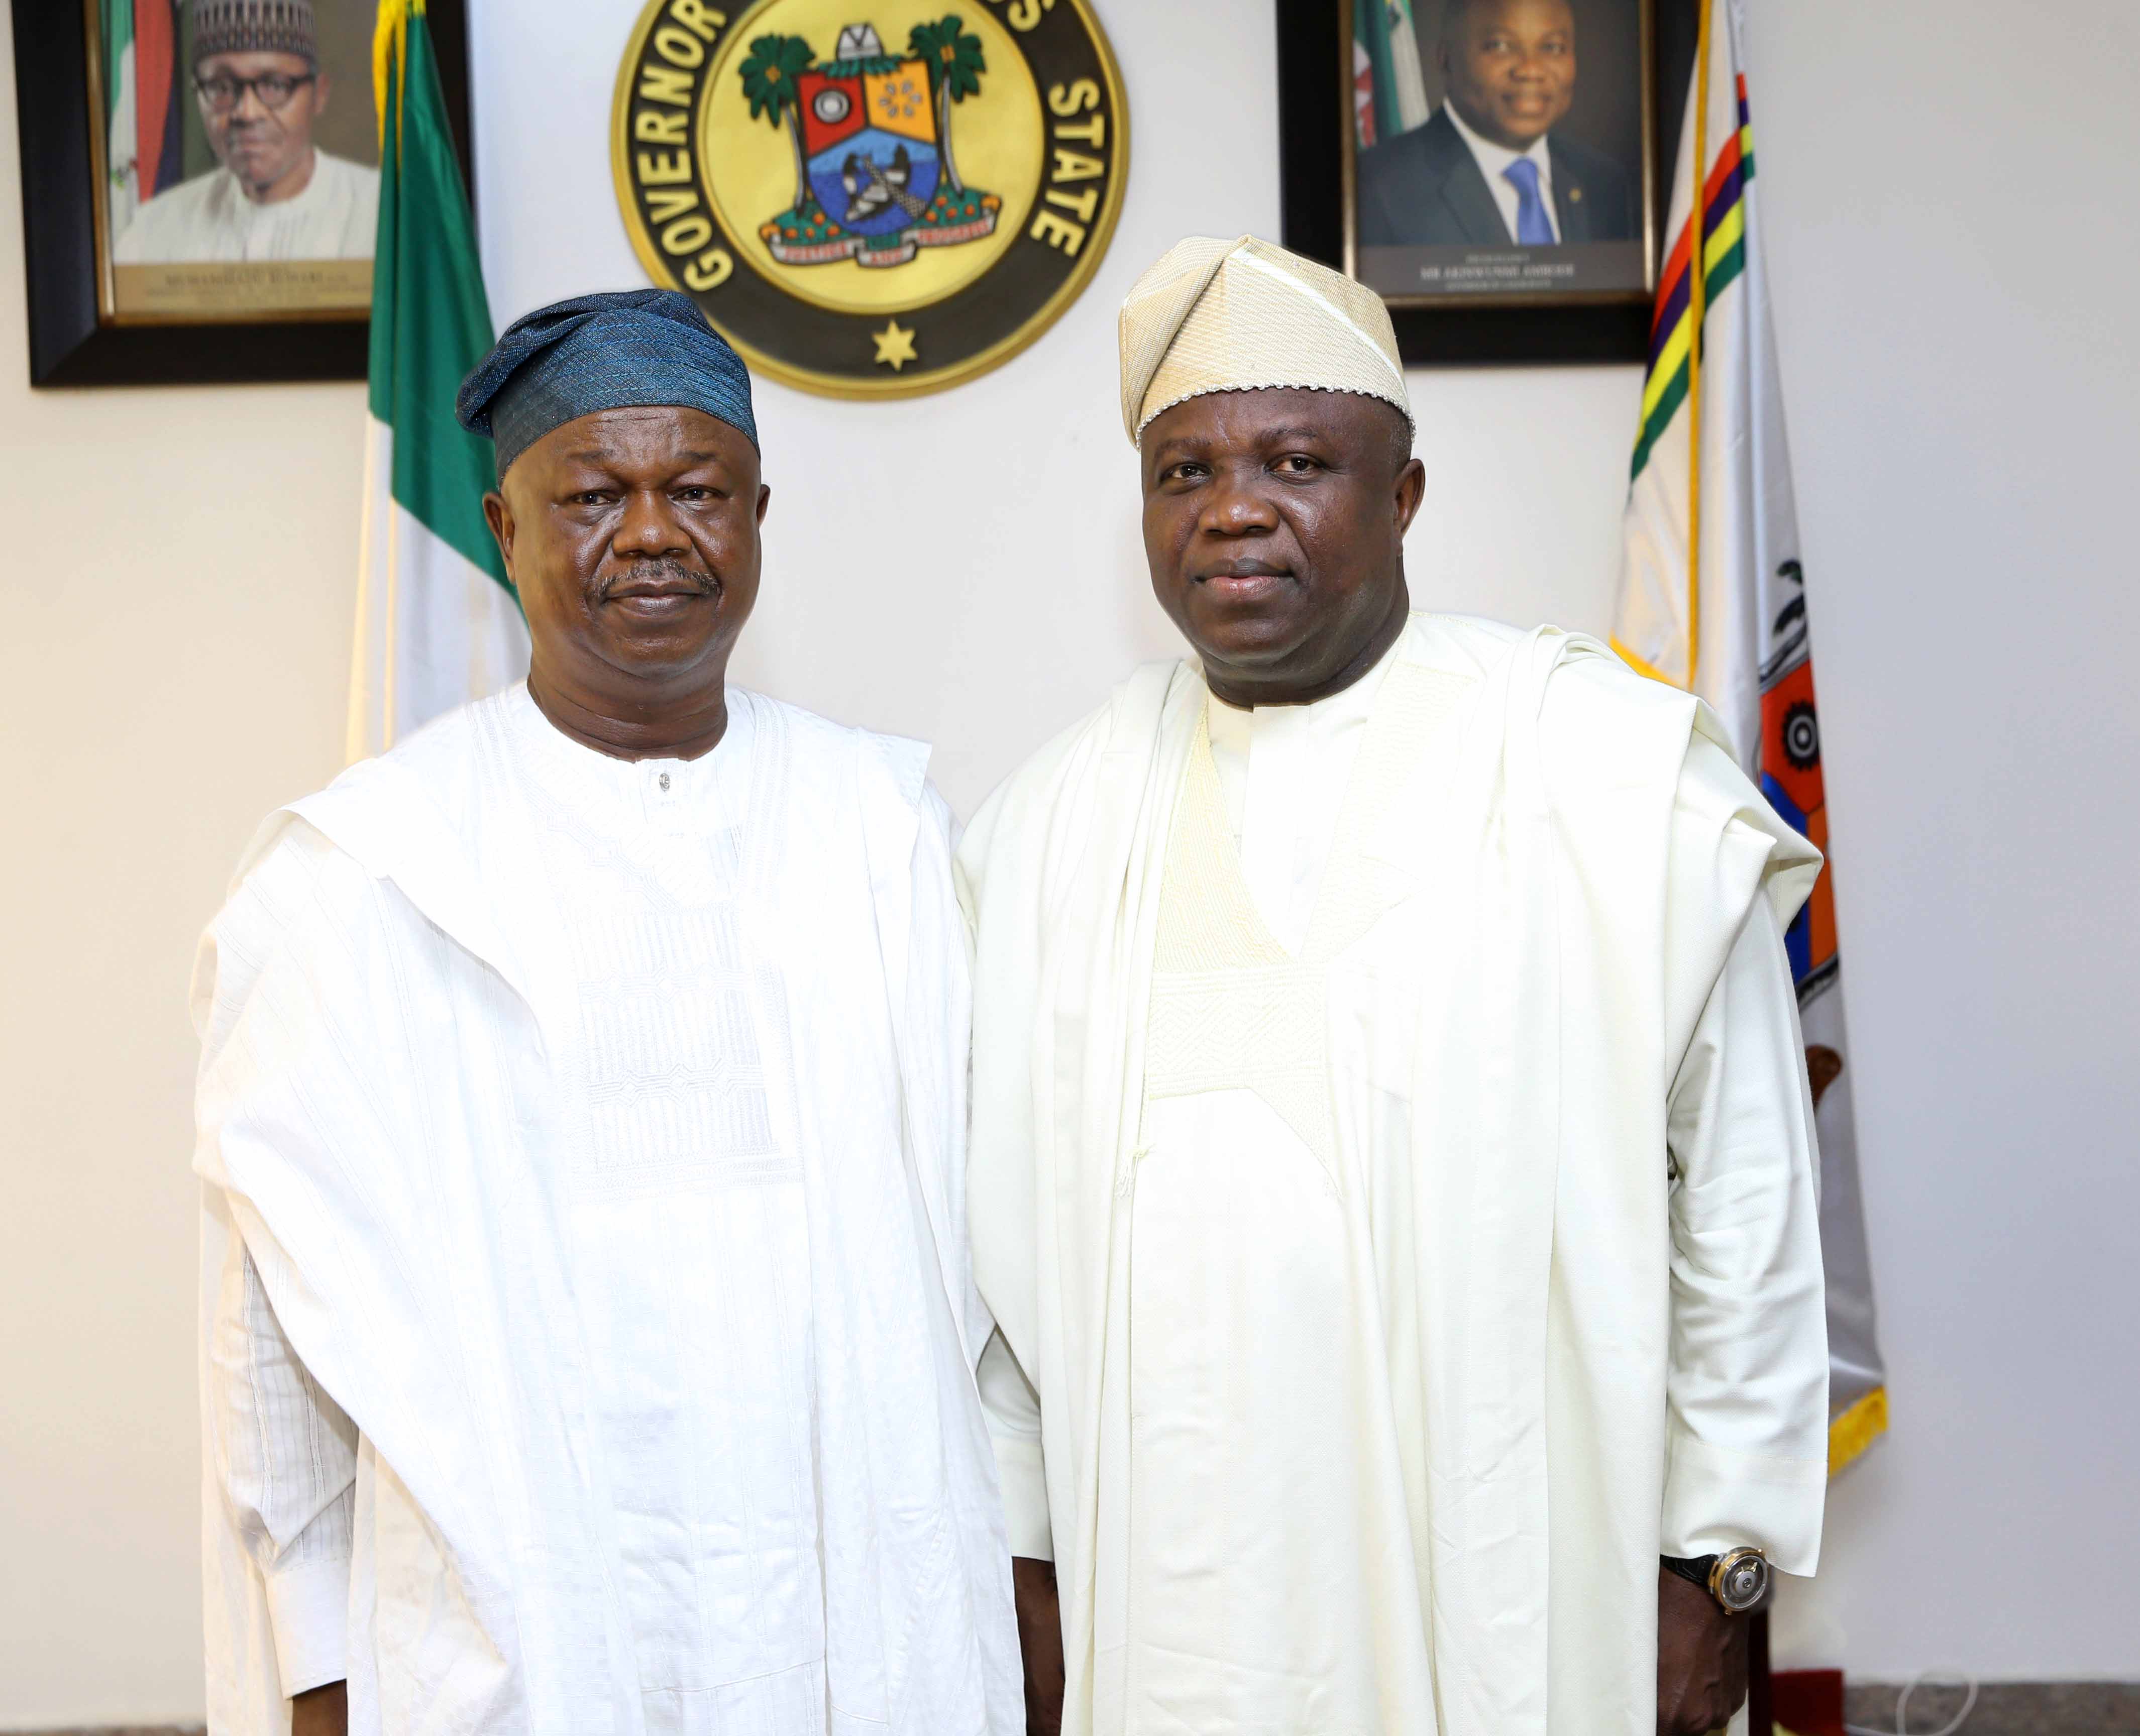 Lagos State Governor, Mr. Akinwunmi Ambode (right) and President, NASFAT, Alhaji Mohammed-Kamil Yomi Bolarinwa (left) during a courtesy visit by Leaders of NASFAT Islamic Group at the Lagos House, Ikeja, on Thursday, November 30, 2017.  